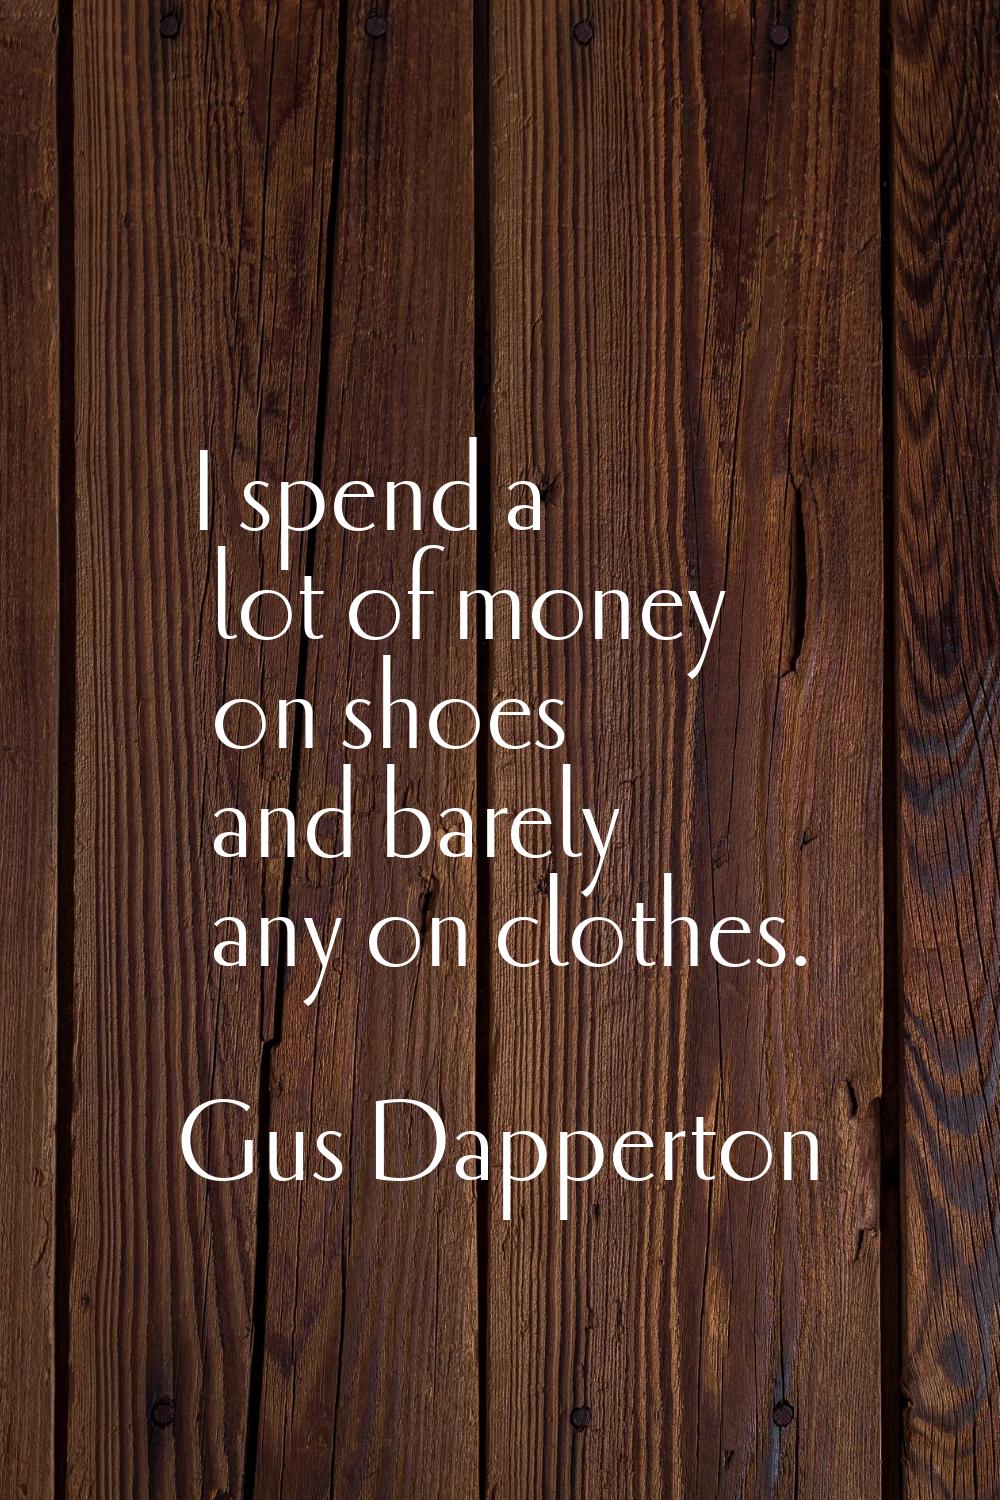 I spend a lot of money on shoes and barely any on clothes.